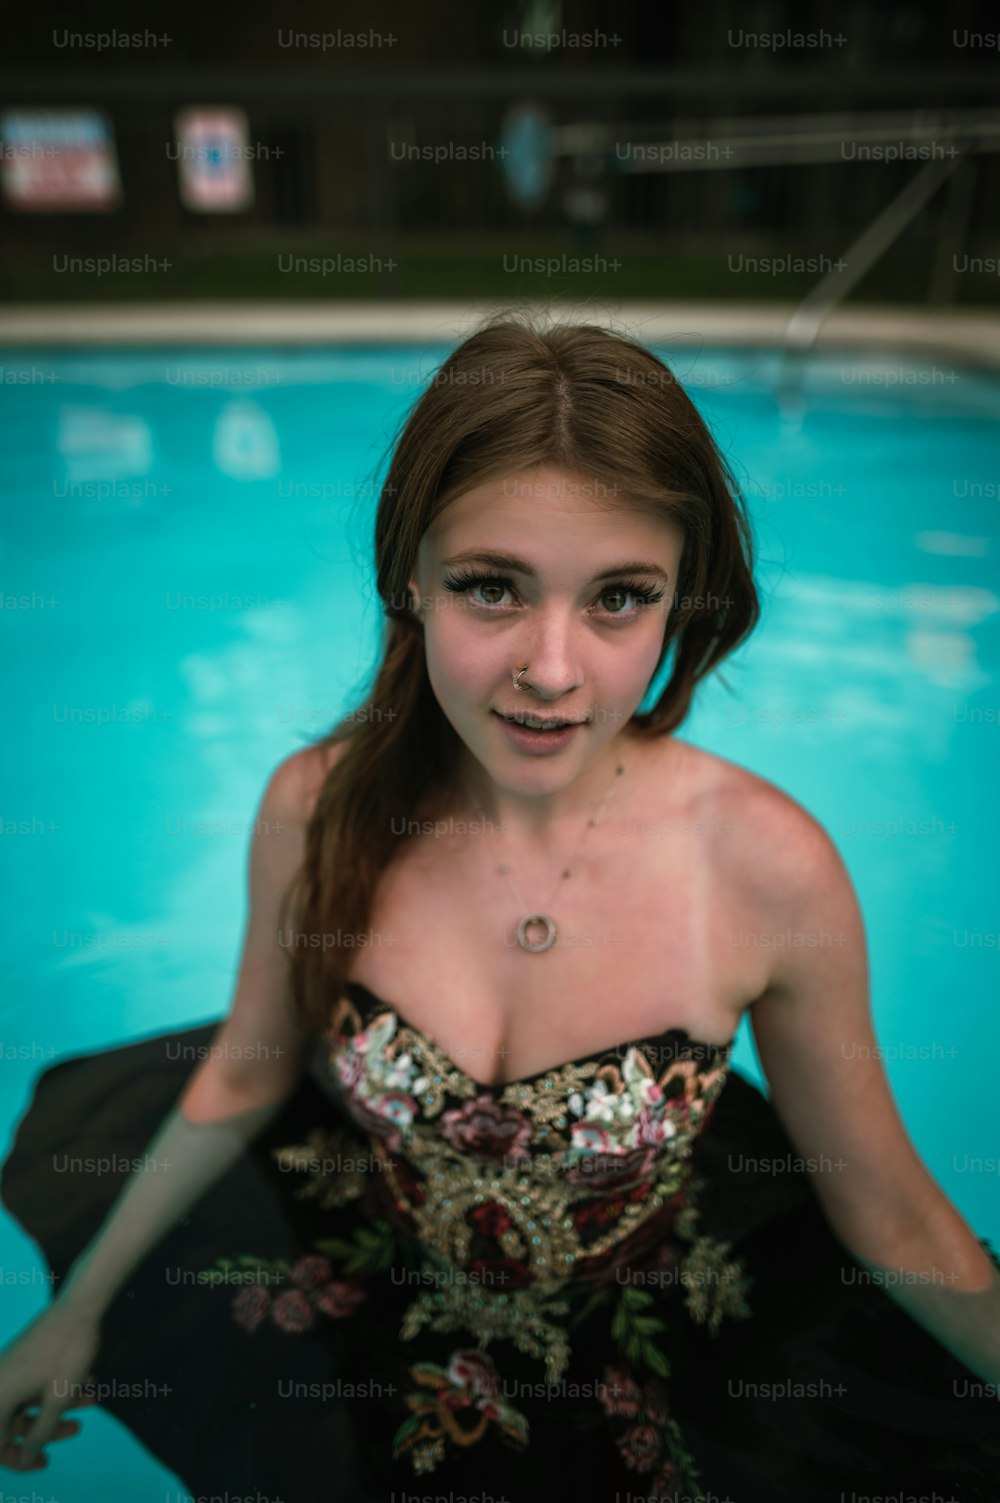 a woman in a black dress standing in a pool